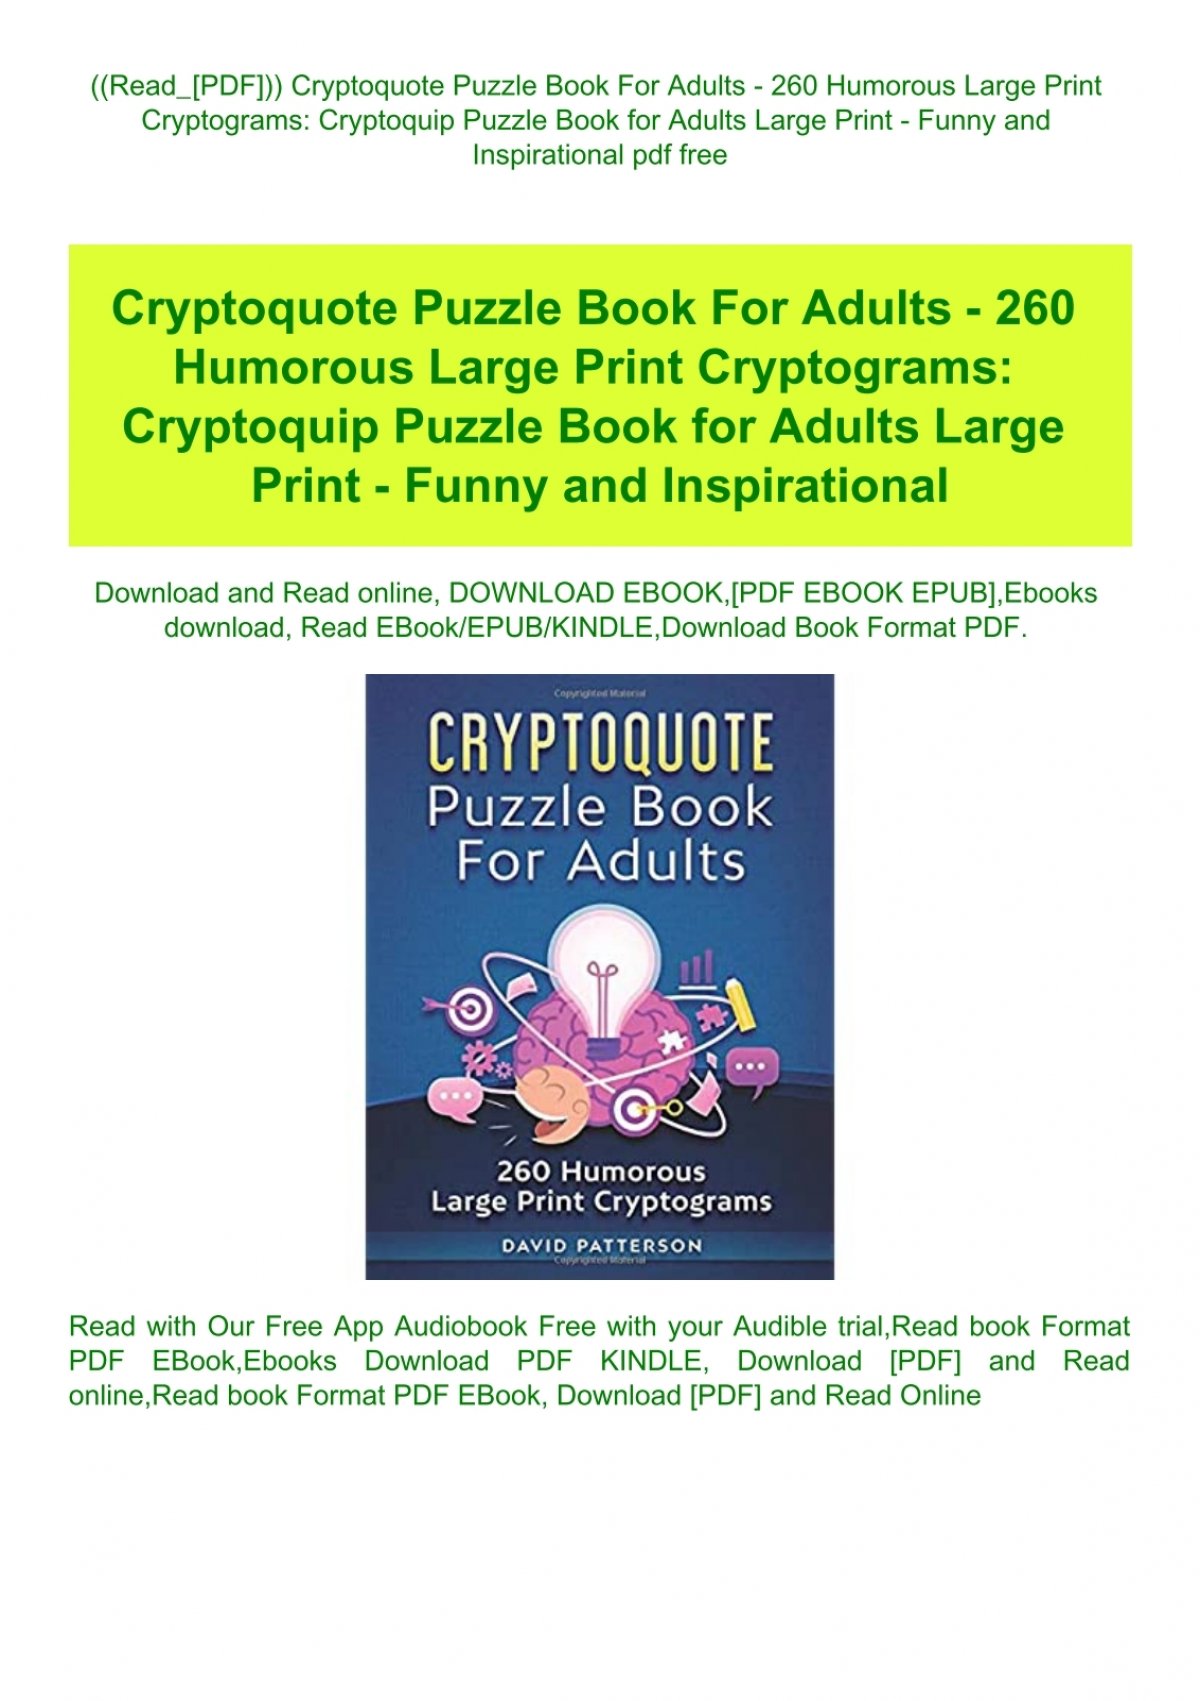 Read Pdf Cryptoquote Puzzle Book For Adults 260 Humorous Large Print Cryptograms Cryptoquip Puzzle Book For Adults Large Print Funny And Inspirational Pdf Free